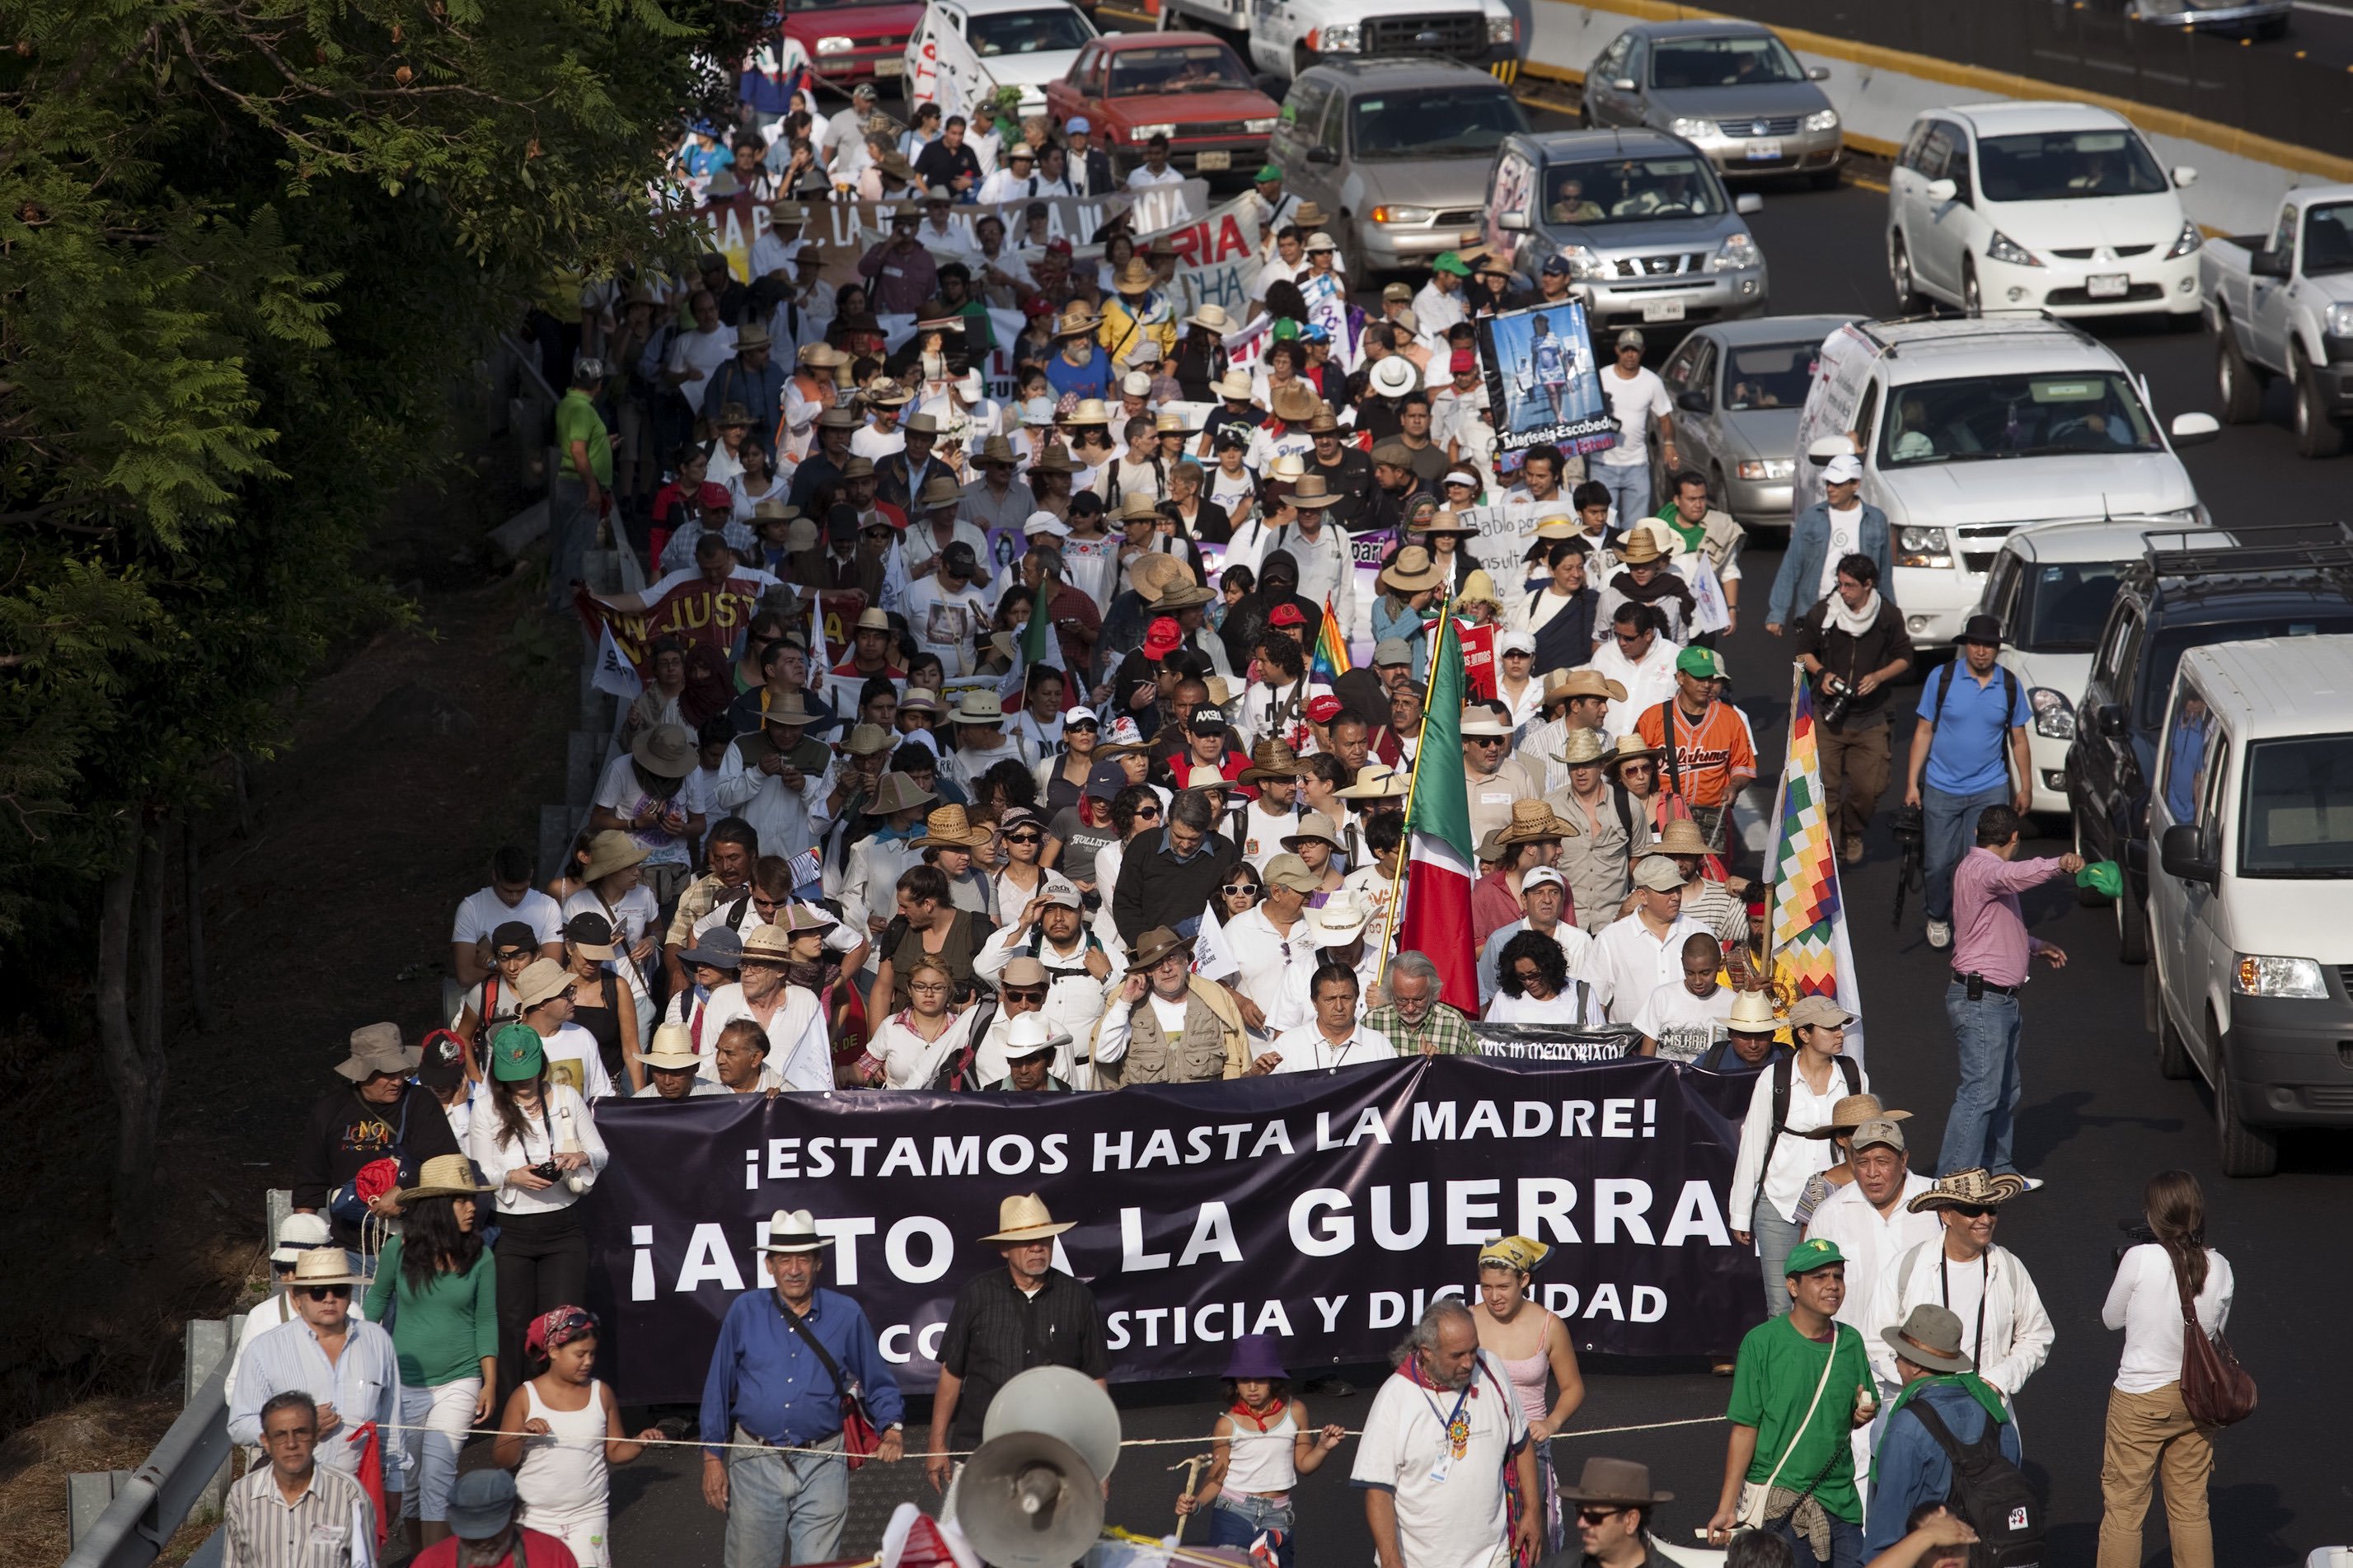 March for Peace and Justice in Mexico